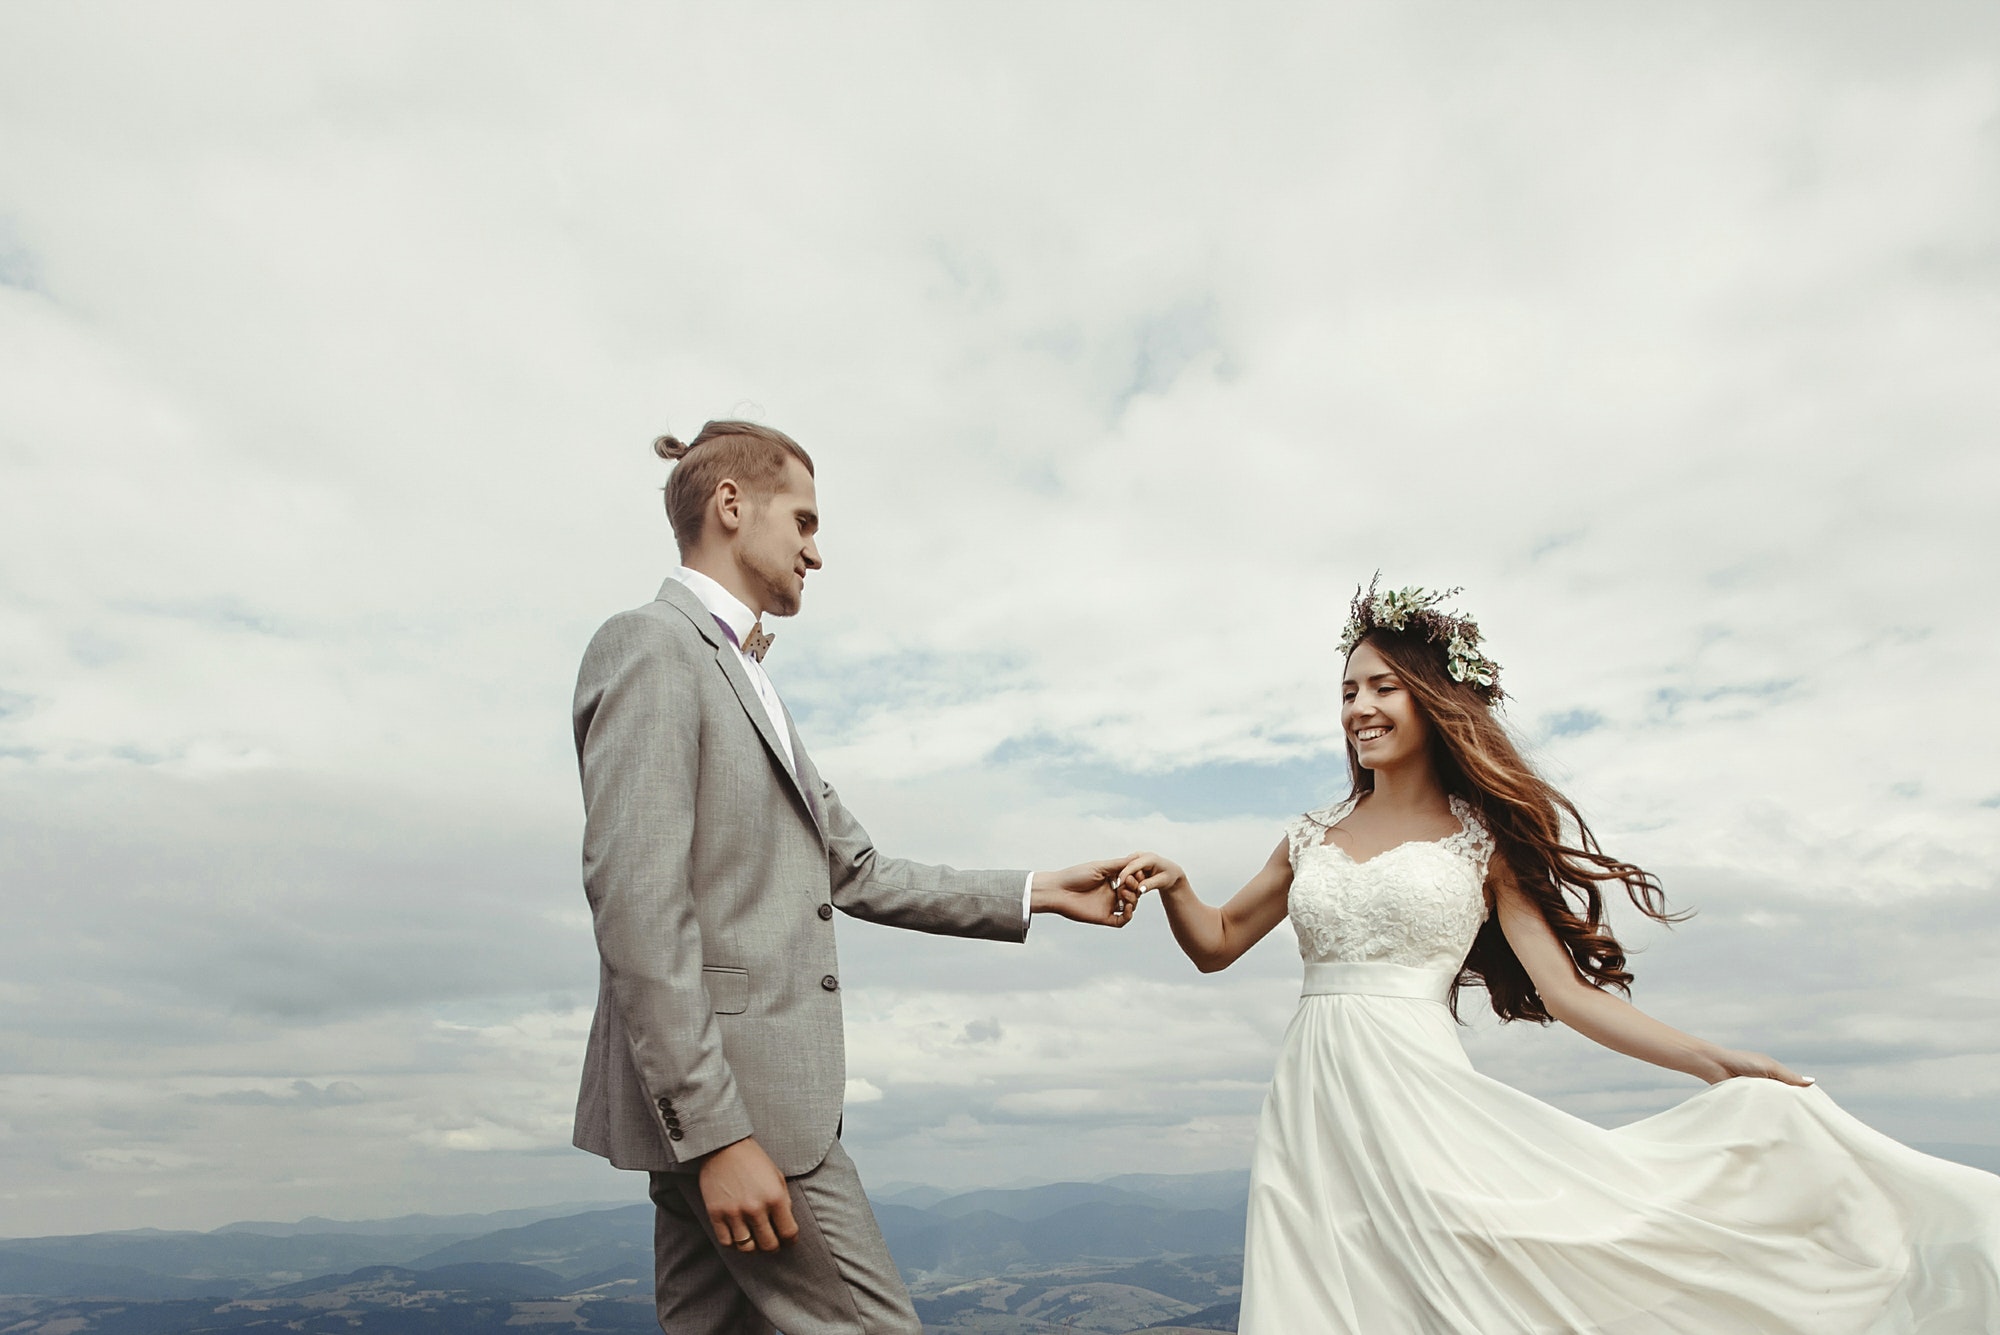 happy gorgeous bride and groom walking at mountains with amazing view